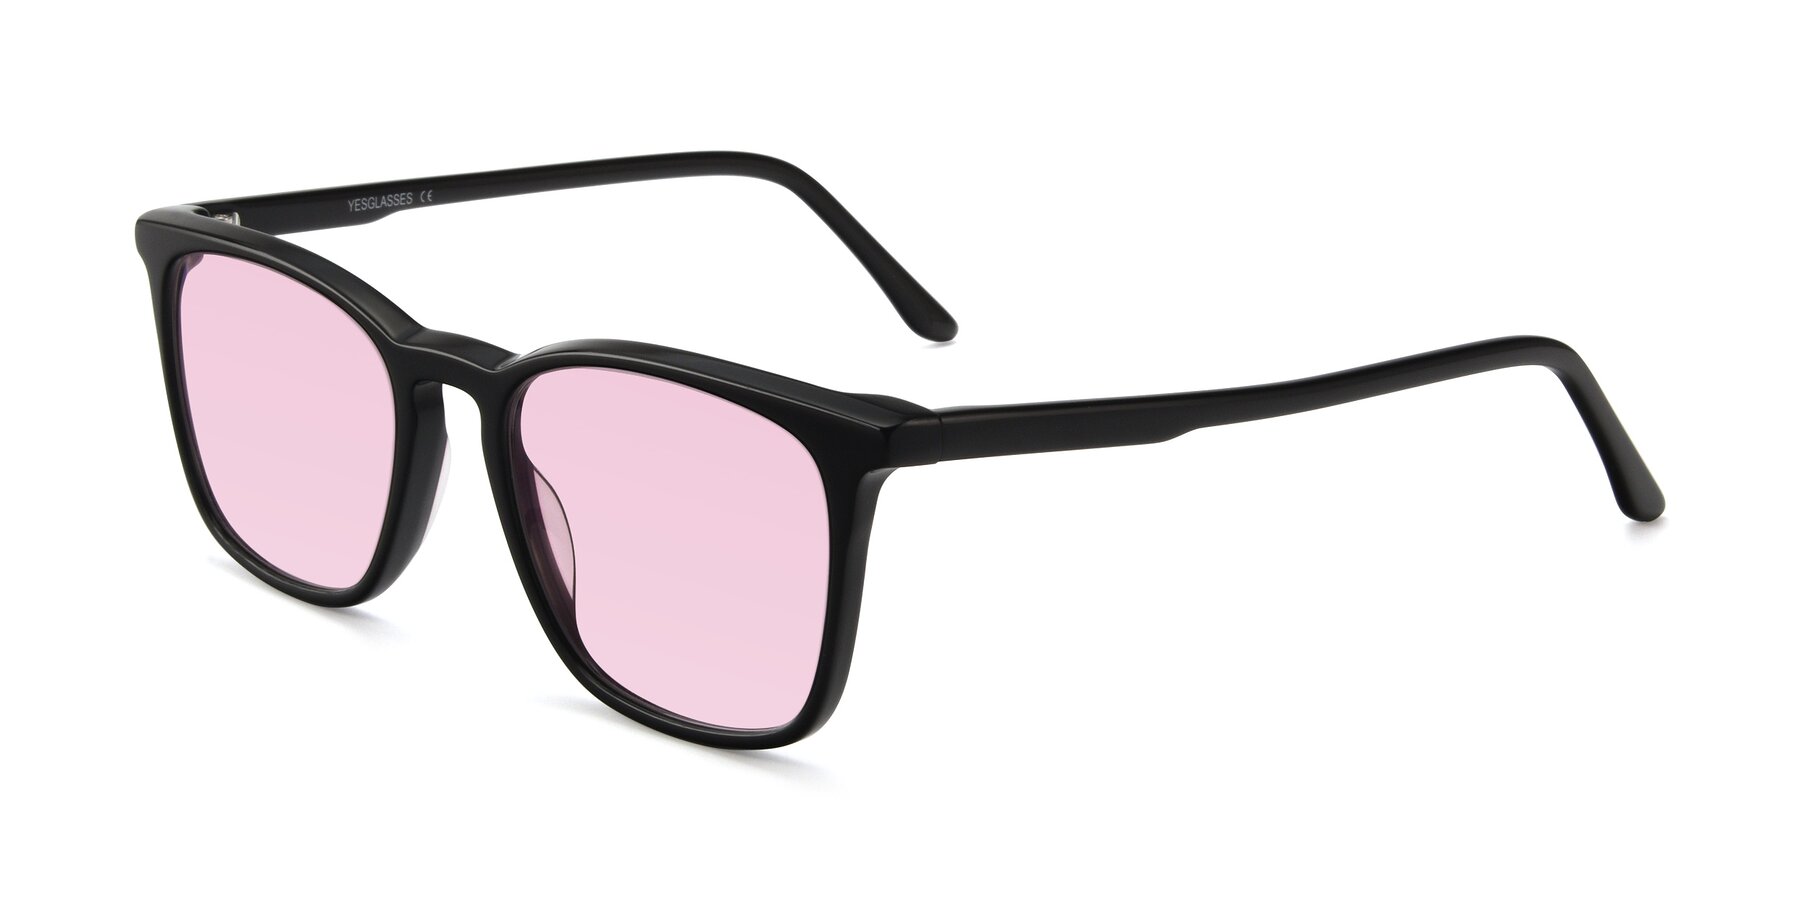 Angle of Vigor in Black with Light Pink Tinted Lenses